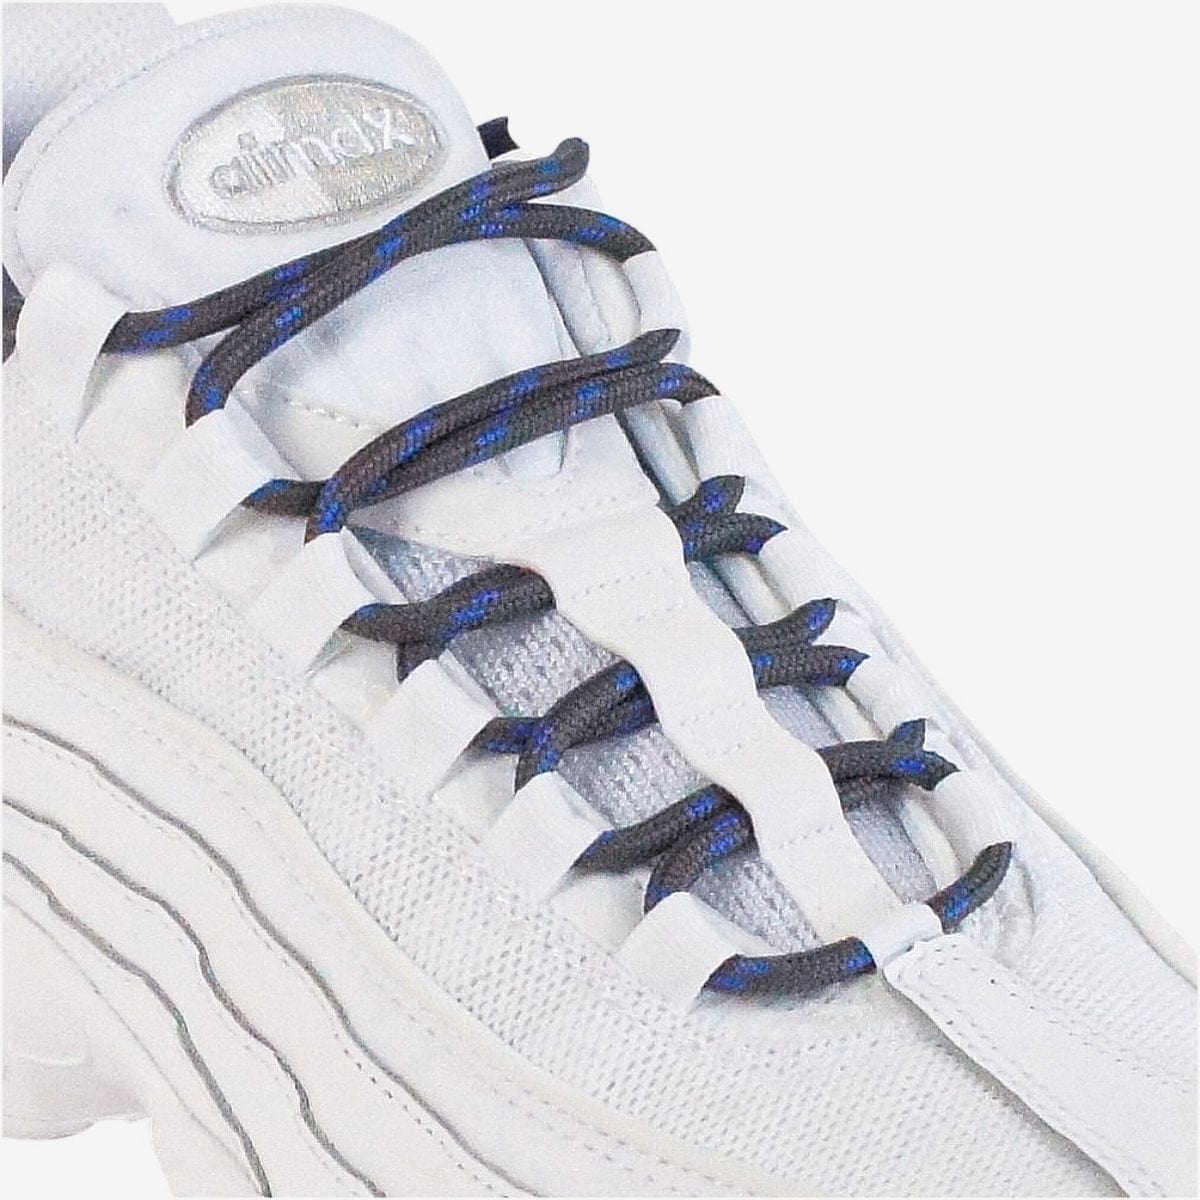 walking-shoe-laces-online-in-australia-colour-grey-and-blue